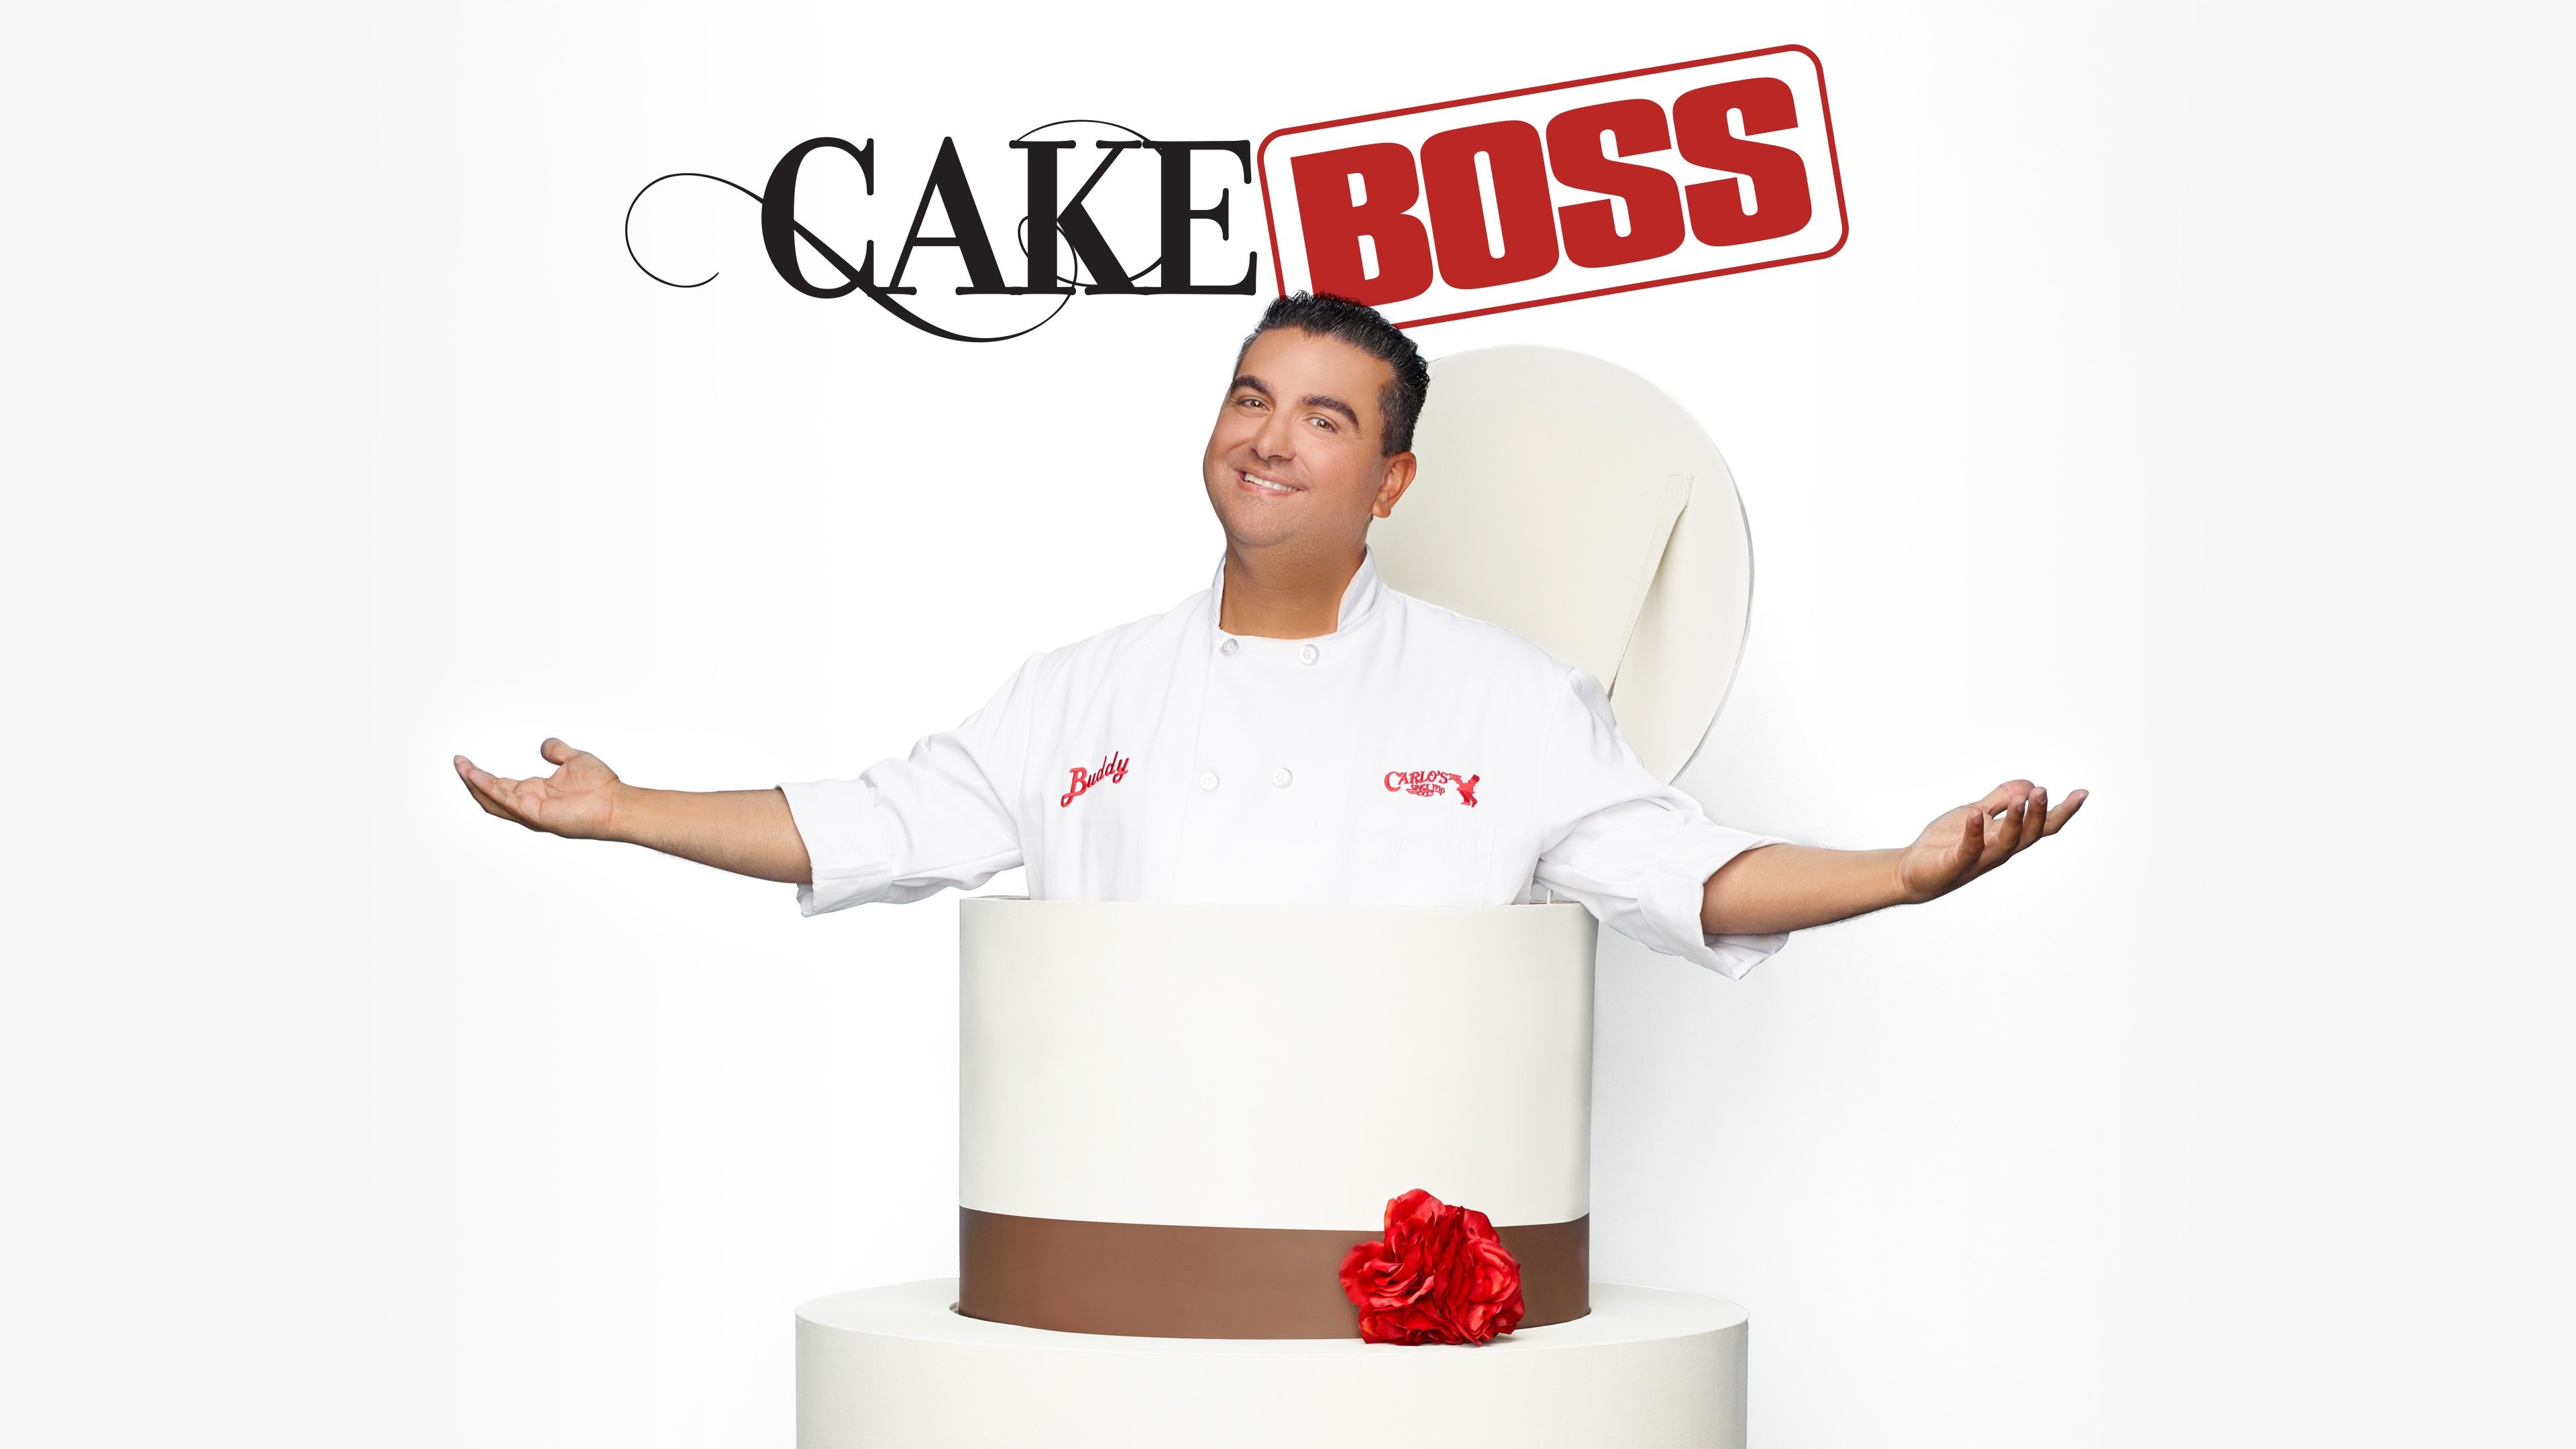 Happy birthday to my brother-in-law and my right hand man  @maddalenaandmauro 🎂 #cakeboss #buddyvalastro | Instagram